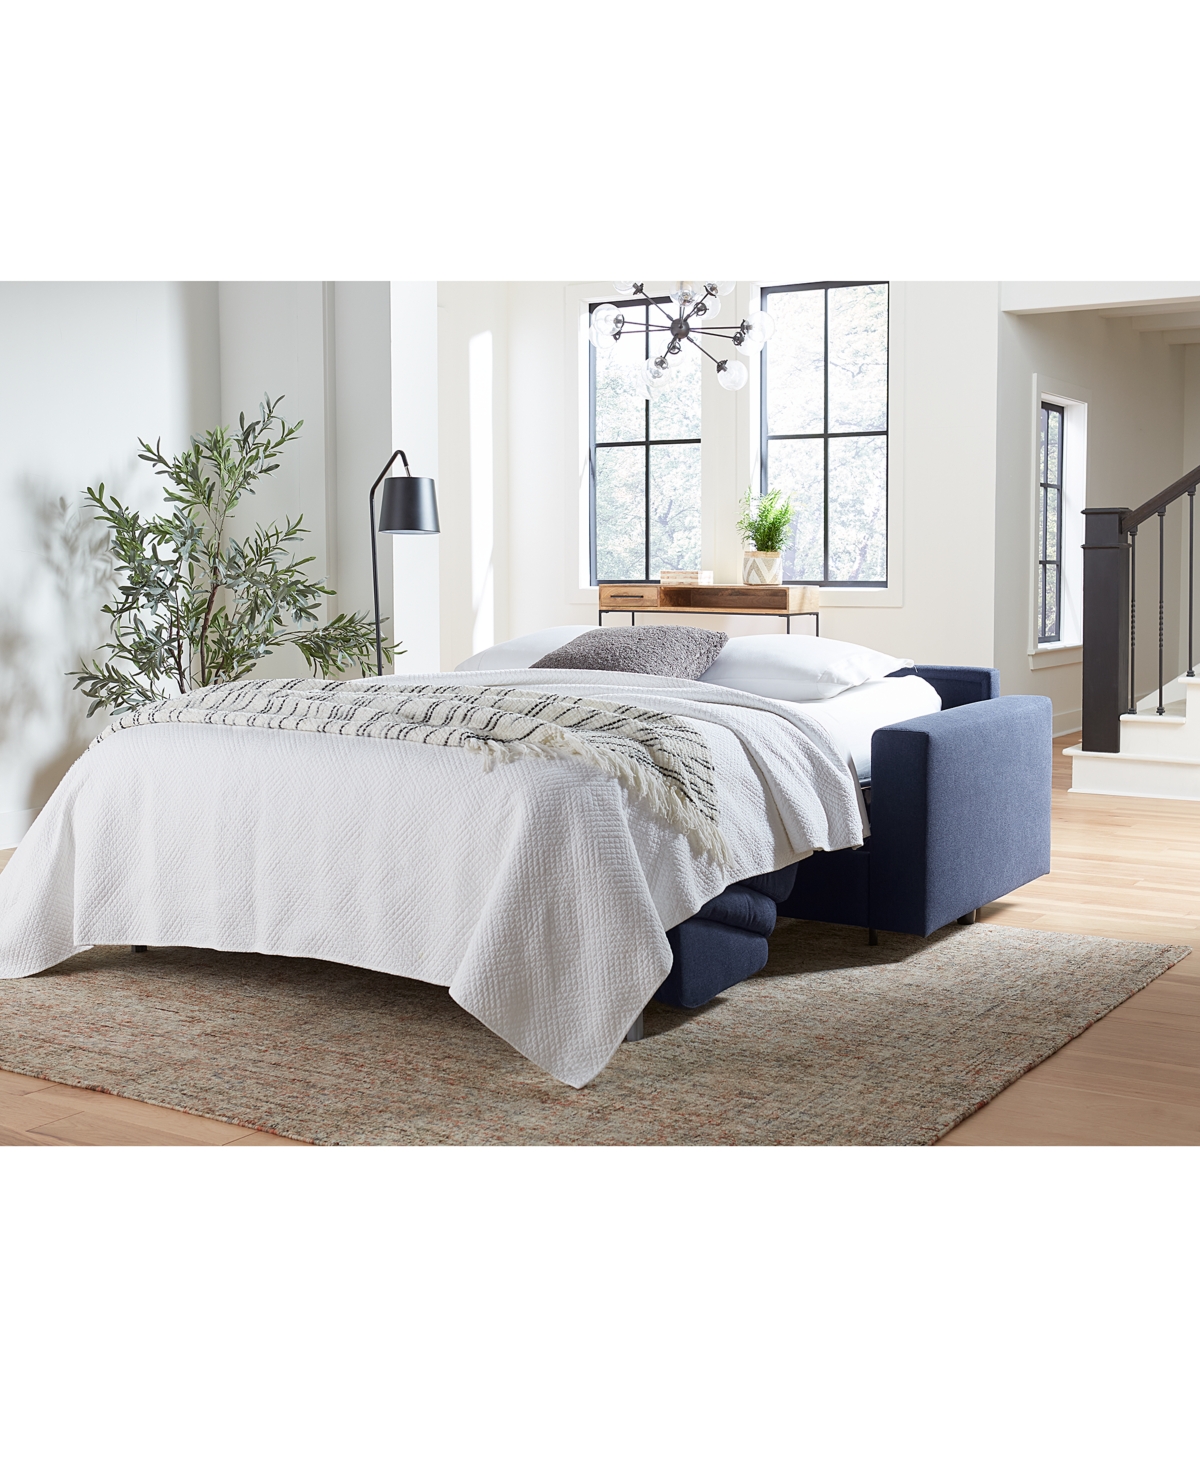 Shop Macy's Giorgio 83" Queen Fabric Stearns & Foster Sleeper Sofa, Created For  In Deep Blue